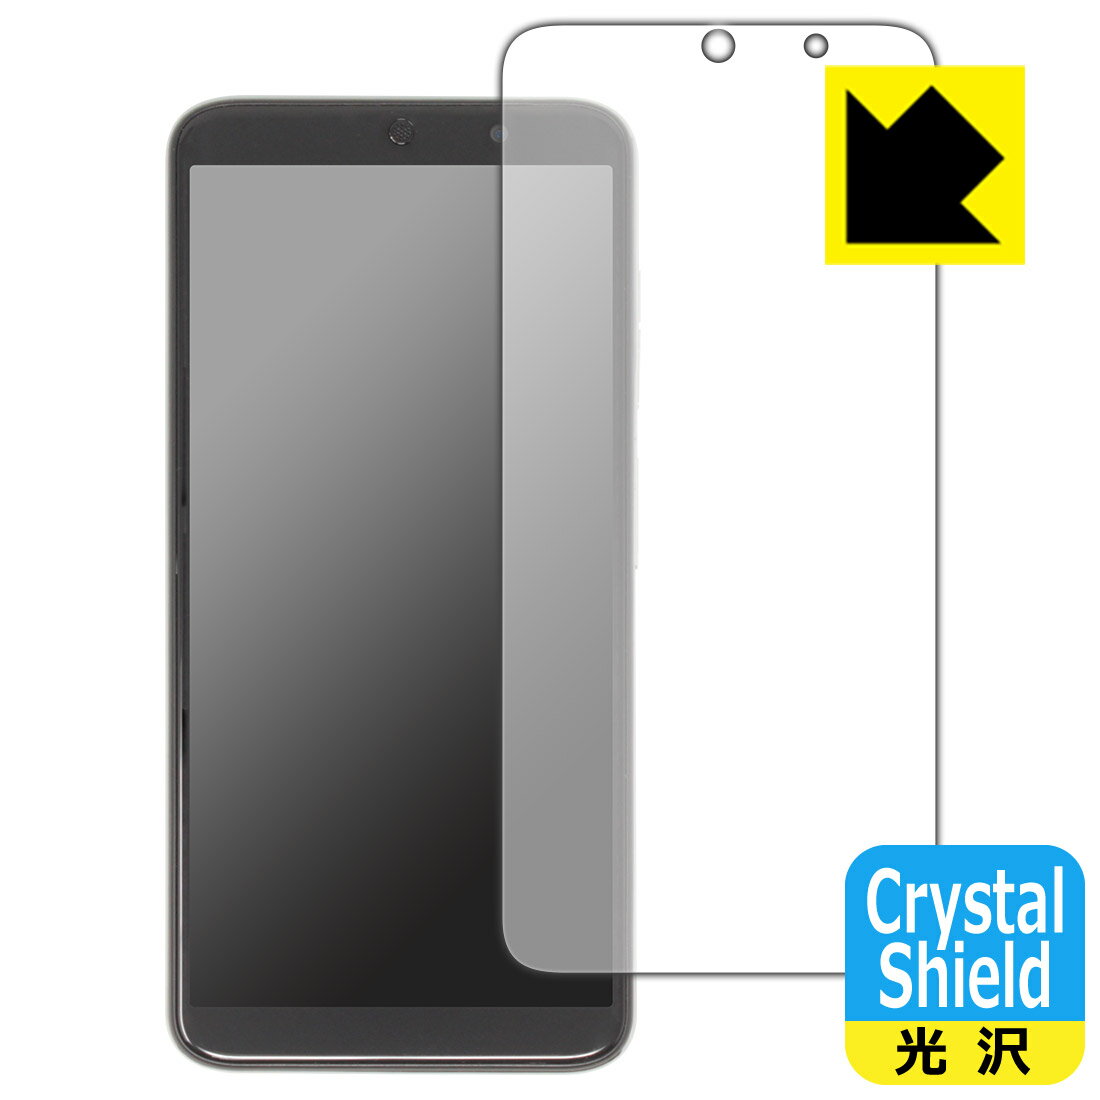 Crystal Shield【光沢】保護フィルム Jectse Jectse1kuqi3dwz0 / Jectsemsb9rnh7wv / Jectser6pnaghtc0 / Yunseityw6dgr0vuyt (3枚セット) 日本製 自社製造直販